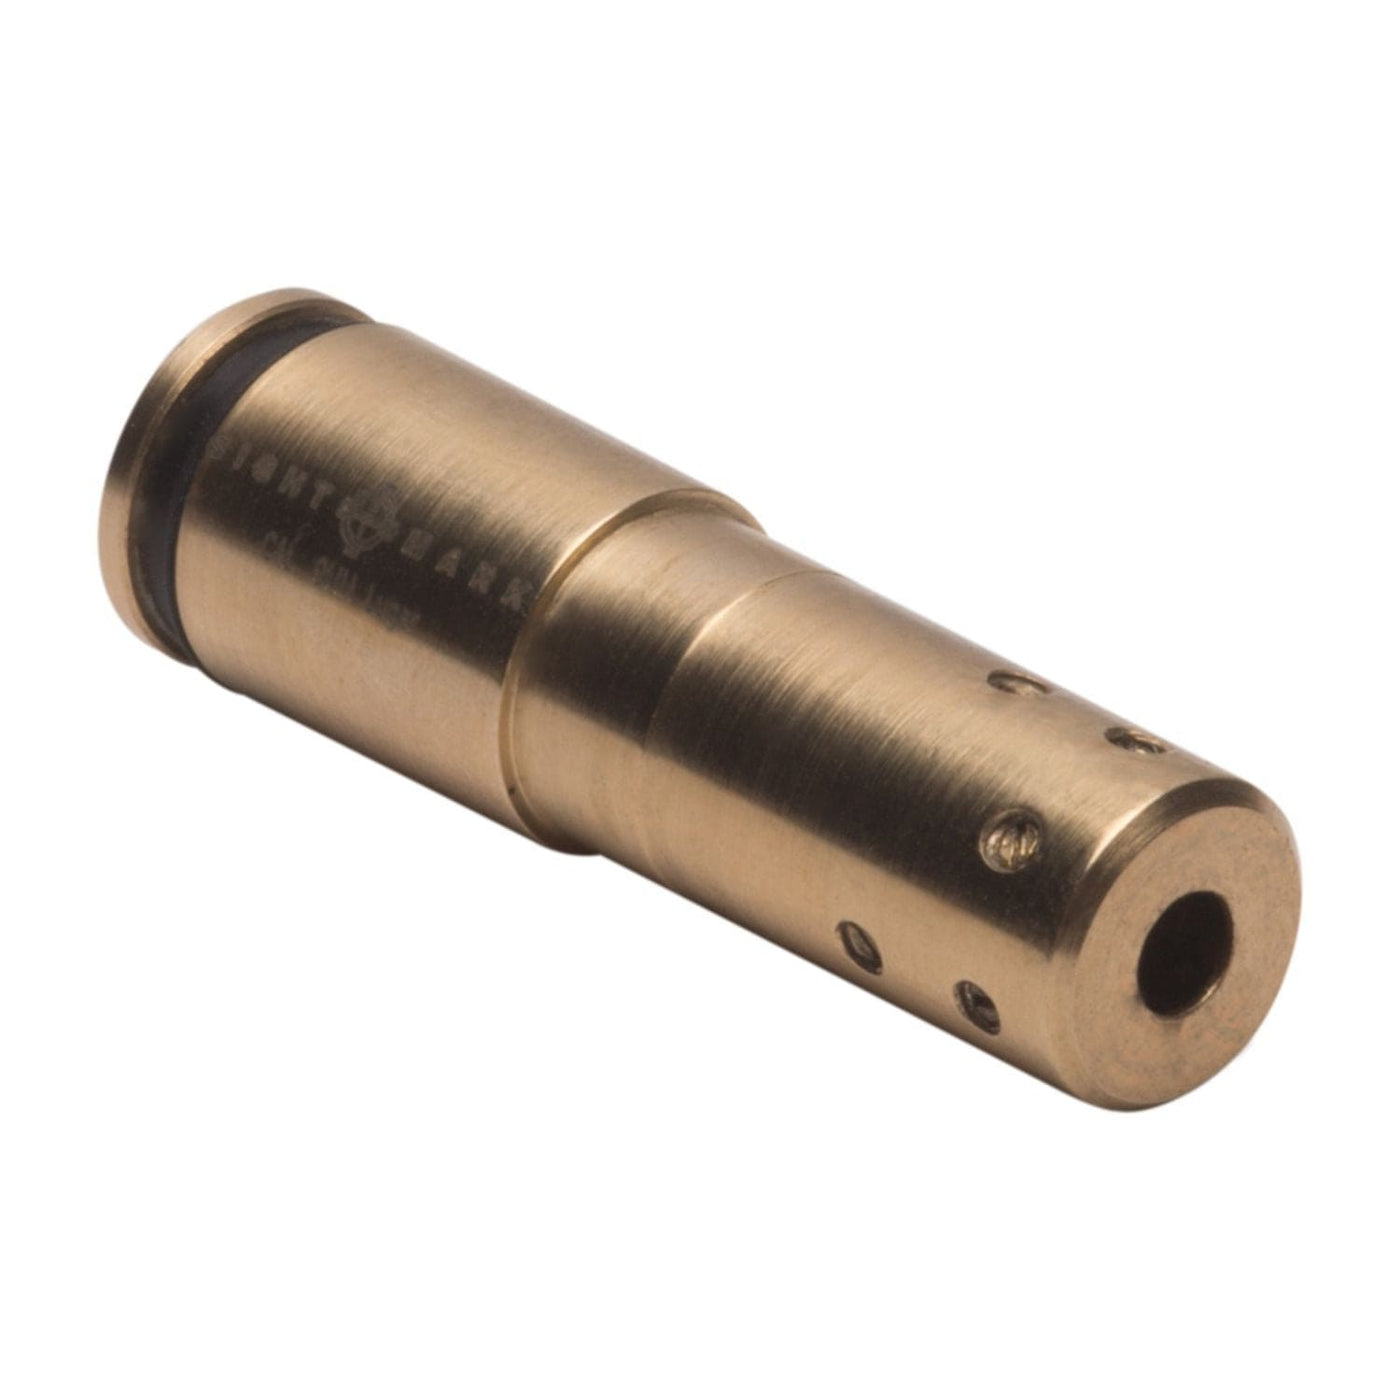 Sightmark Sightmark Accudot Red Laser Boresight 9mm Luger Optics And Sights